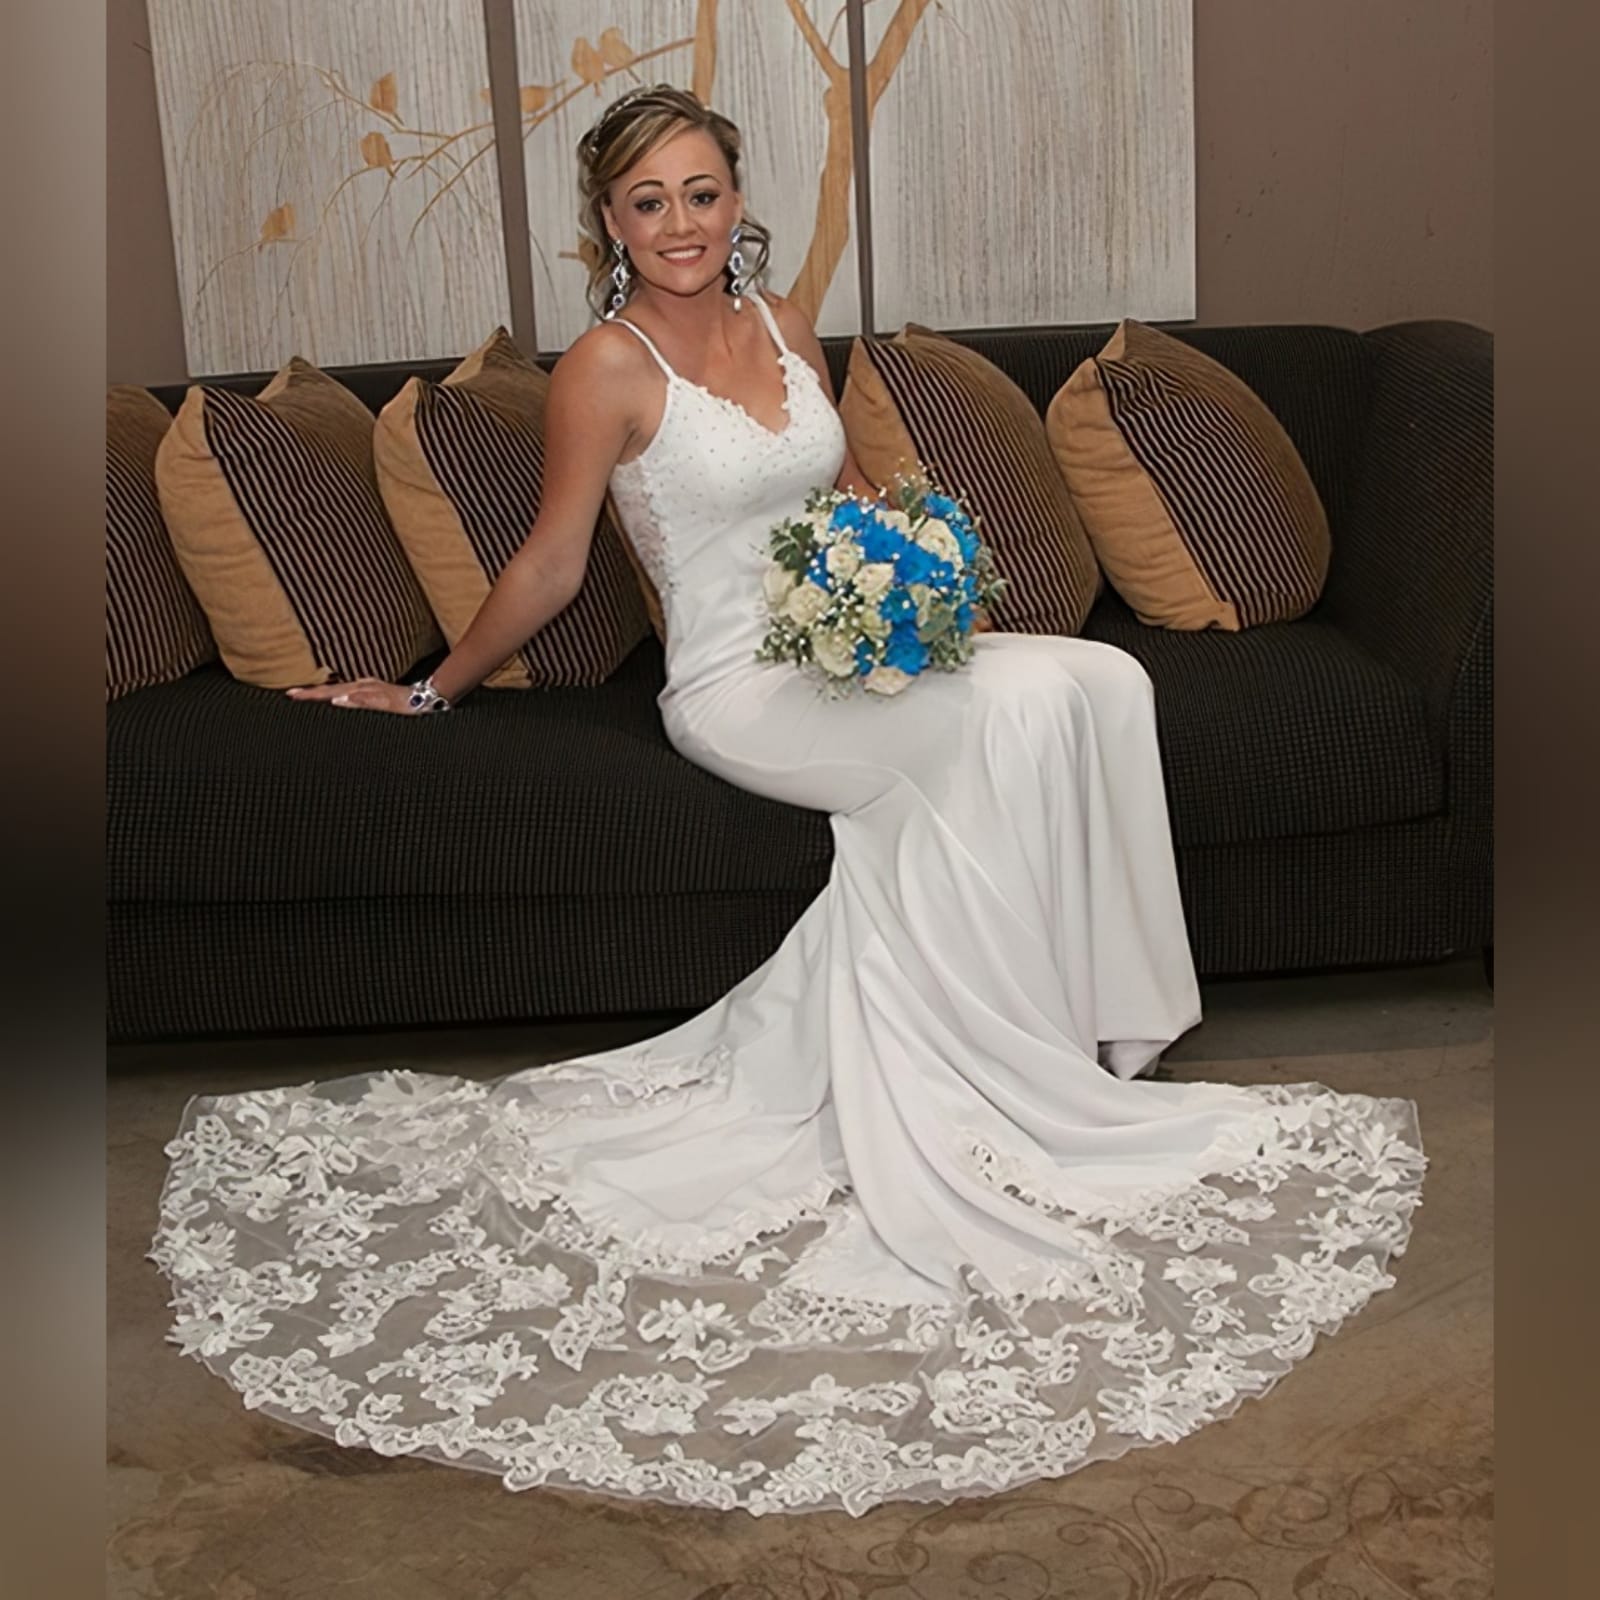 Stunning white soft mermaid lace wedding dress 3 a stunning white soft mermaid lace wedding dress designed and made per measurement sent to my client in south africa. An absolute romantic and elegant design that made her day more special and memorable. Wedding dress with a beaded bust. Sheer lace back and a long lace train to add a dramatic touch to this dress